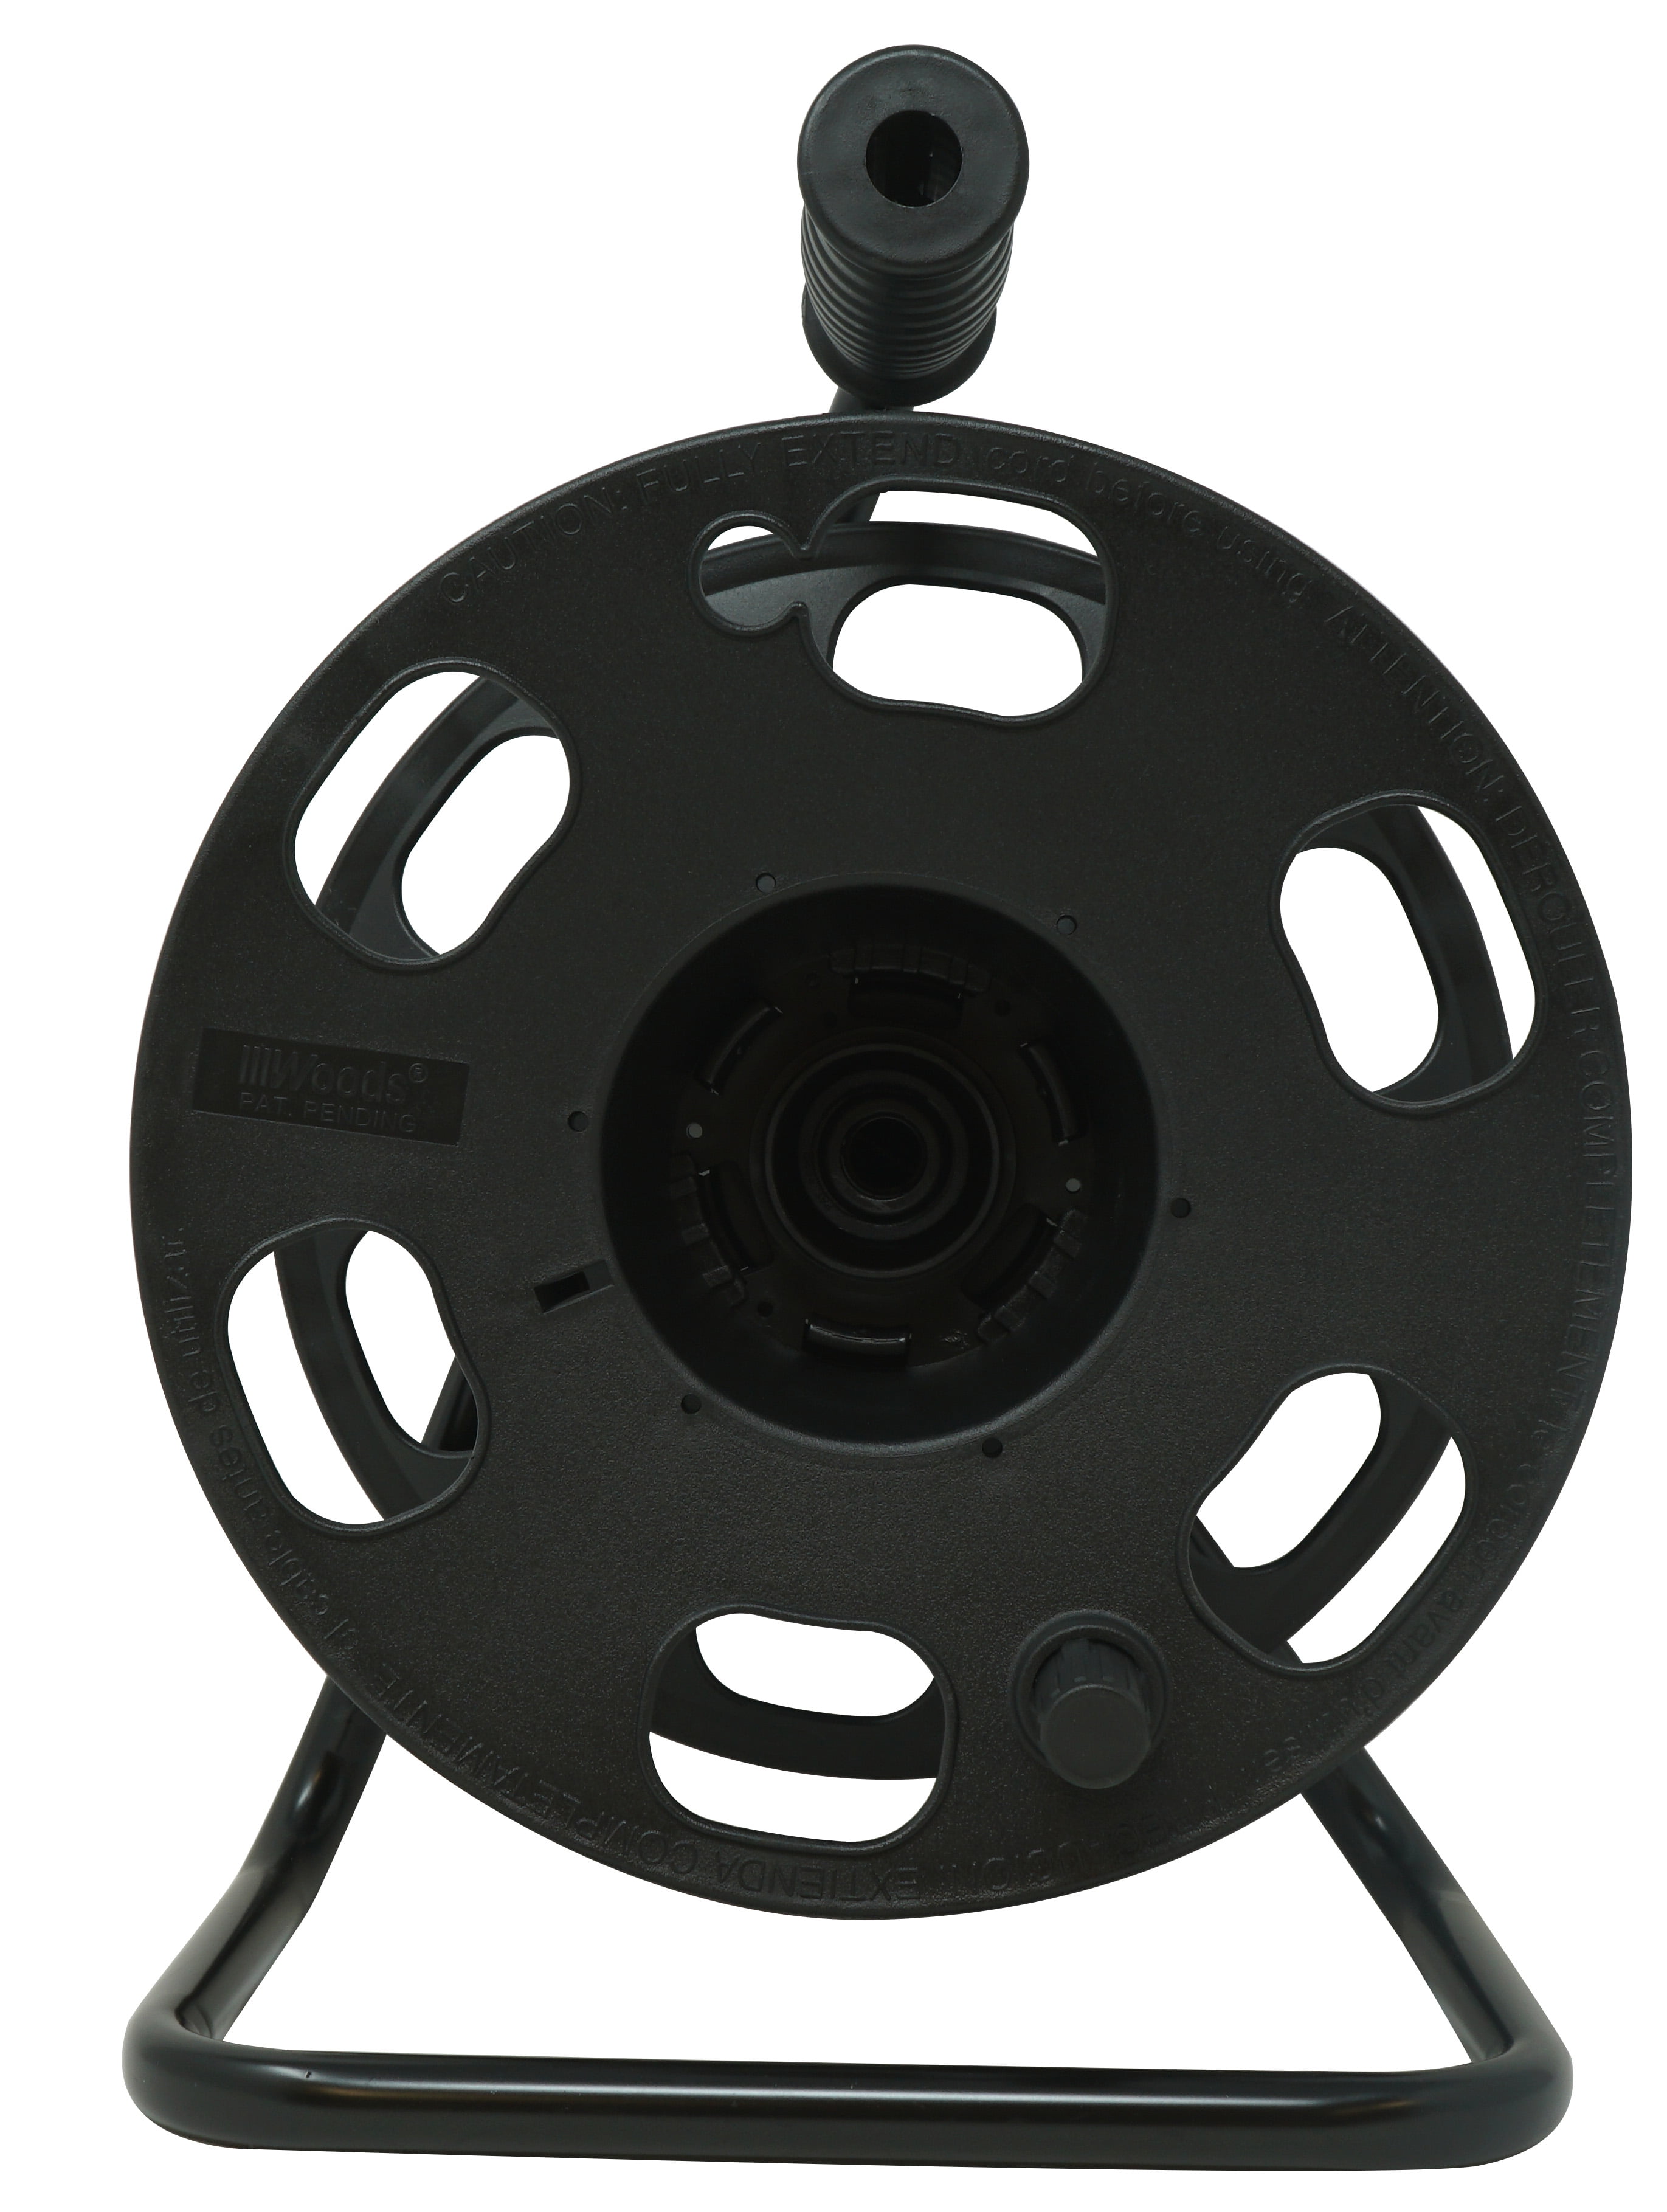 Details about   EXTENSION ELECTRICAL CORD Storage Reel Woods 22849 Durable Heavy Duty Metal NEW 